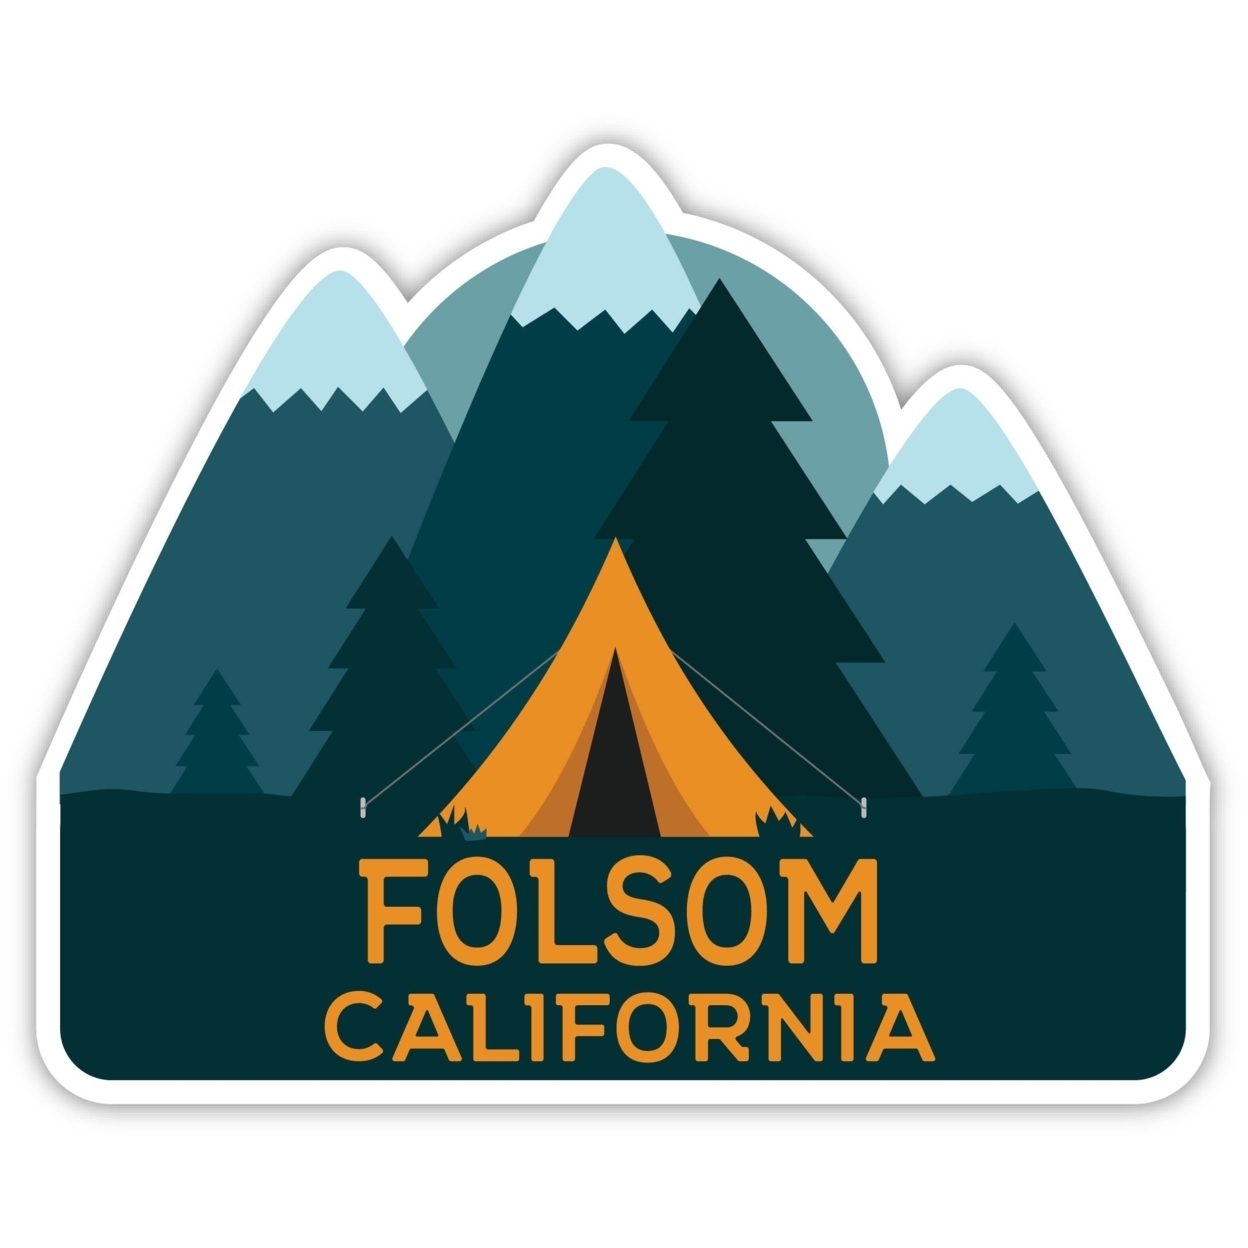 Folsom California Souvenir Decorative Stickers (Choose Theme And Size) - 4-Pack, 4-Inch, Tent